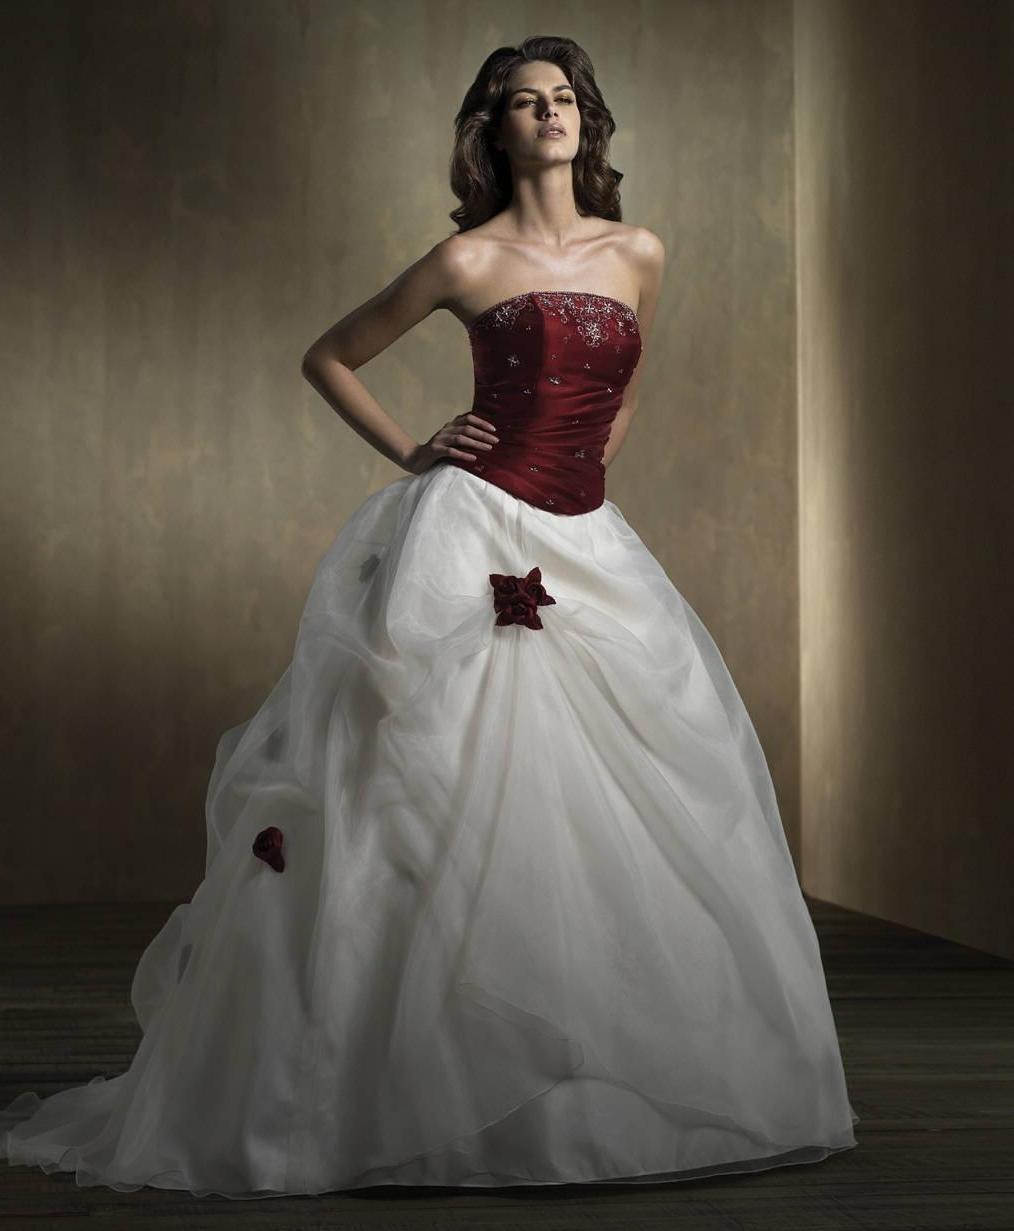 Wedding Dress With Color